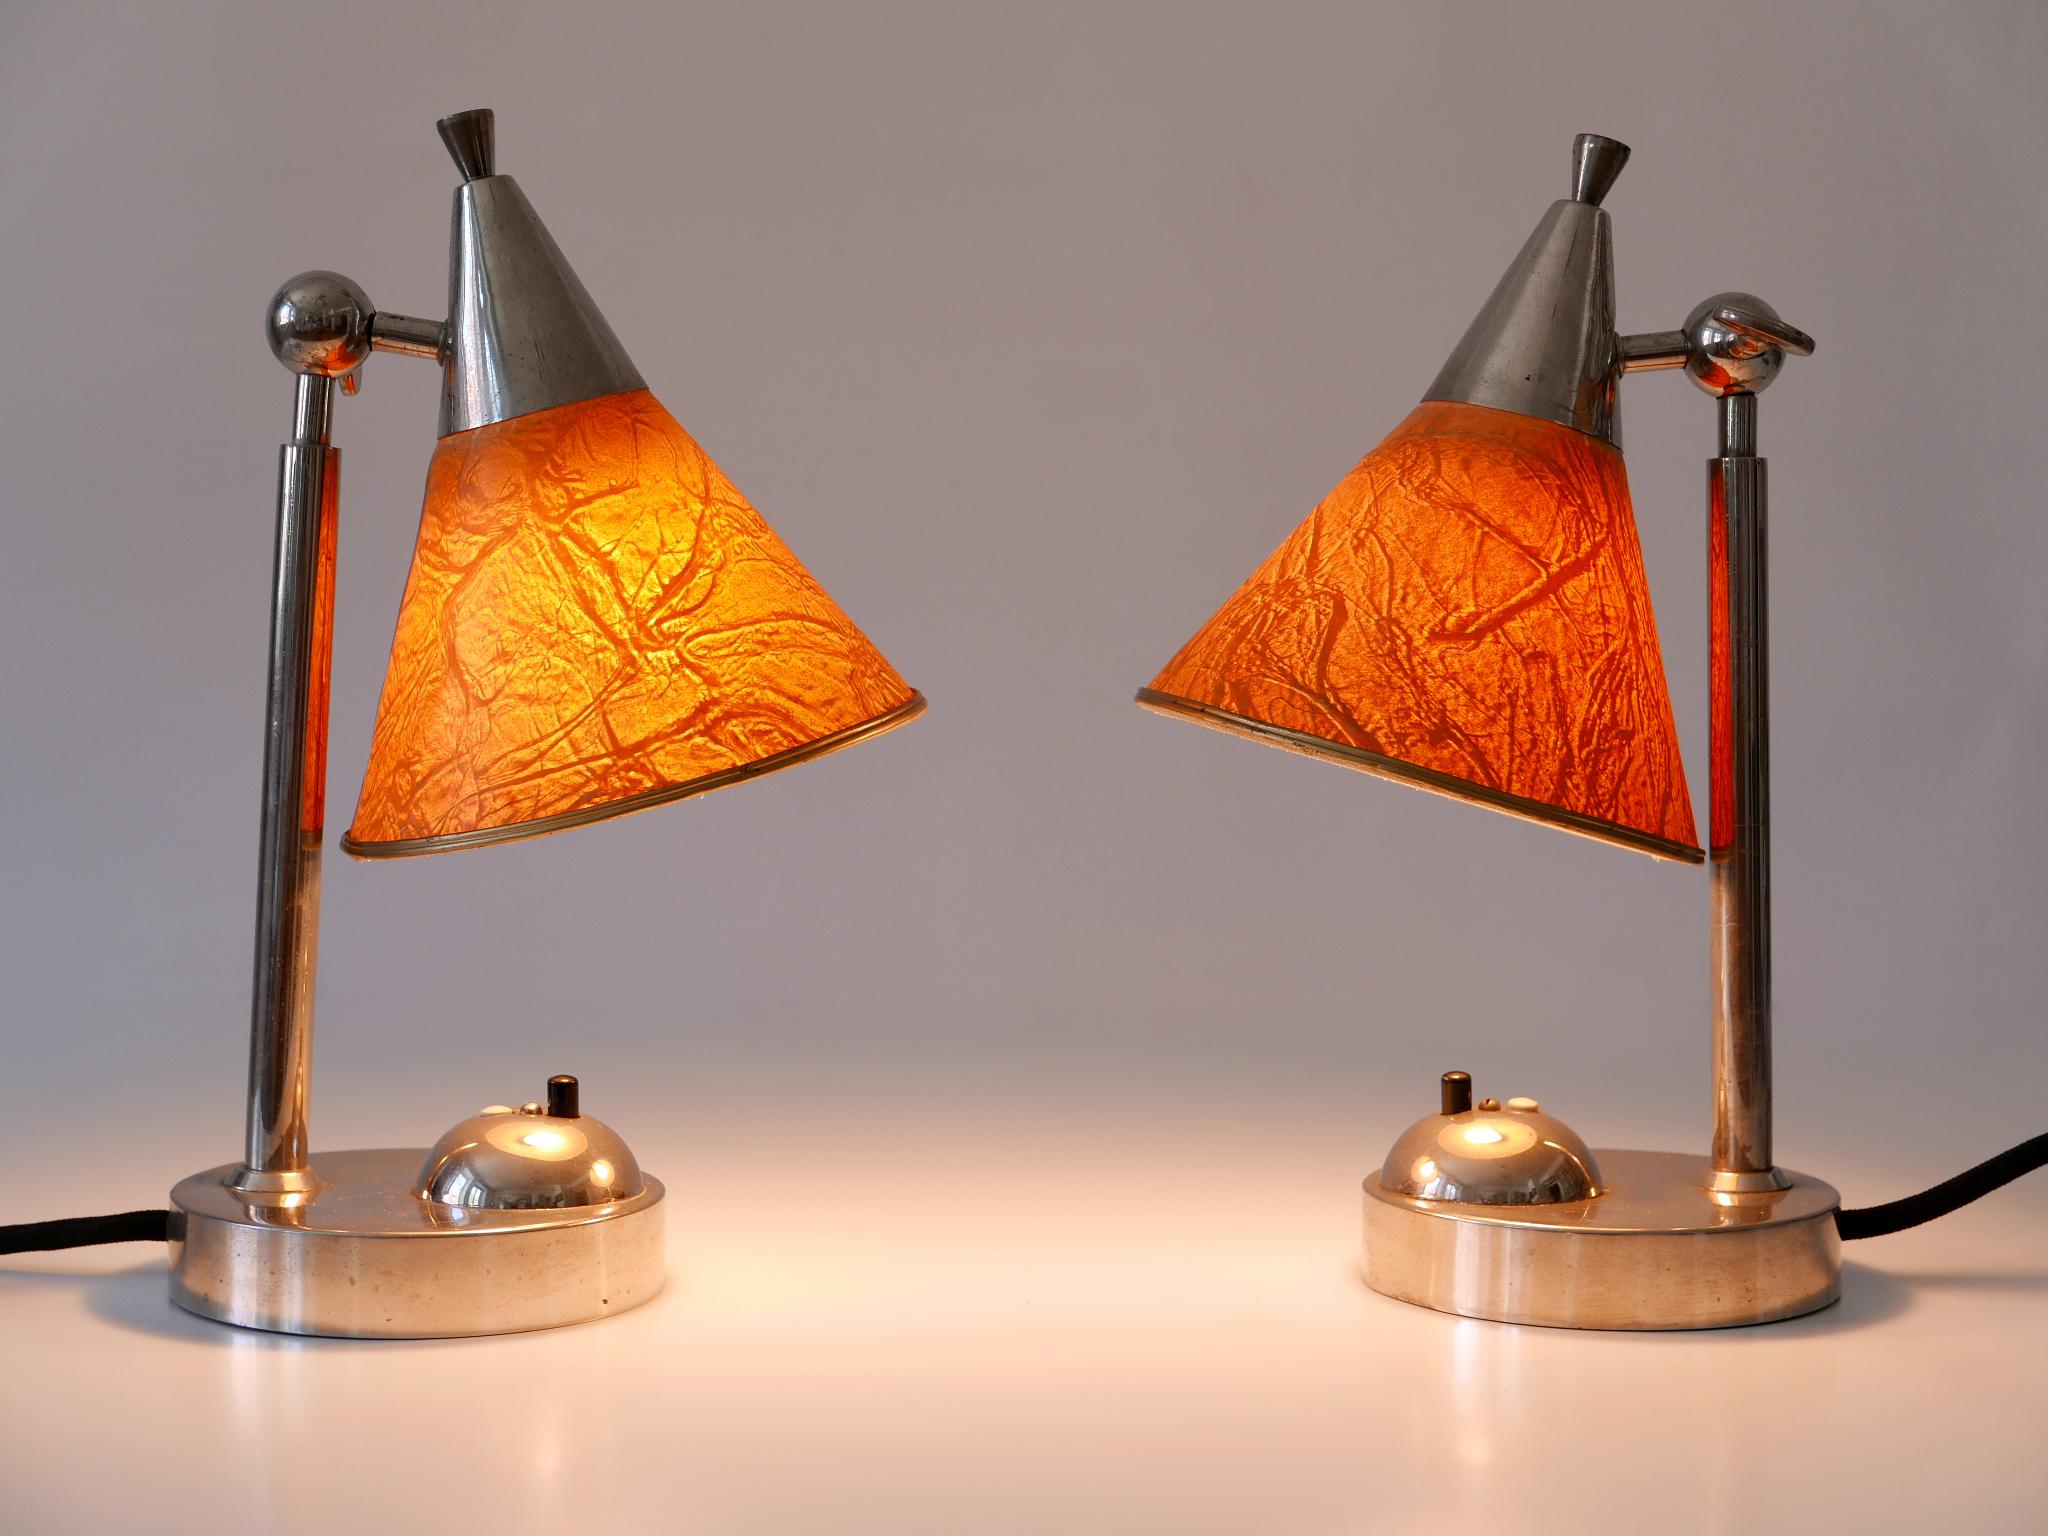 Extremely rare & elegant Art Deco or Bauhaus bedside table lamps or sconces. Adjustable lamp shades which are made of a special paper, called 